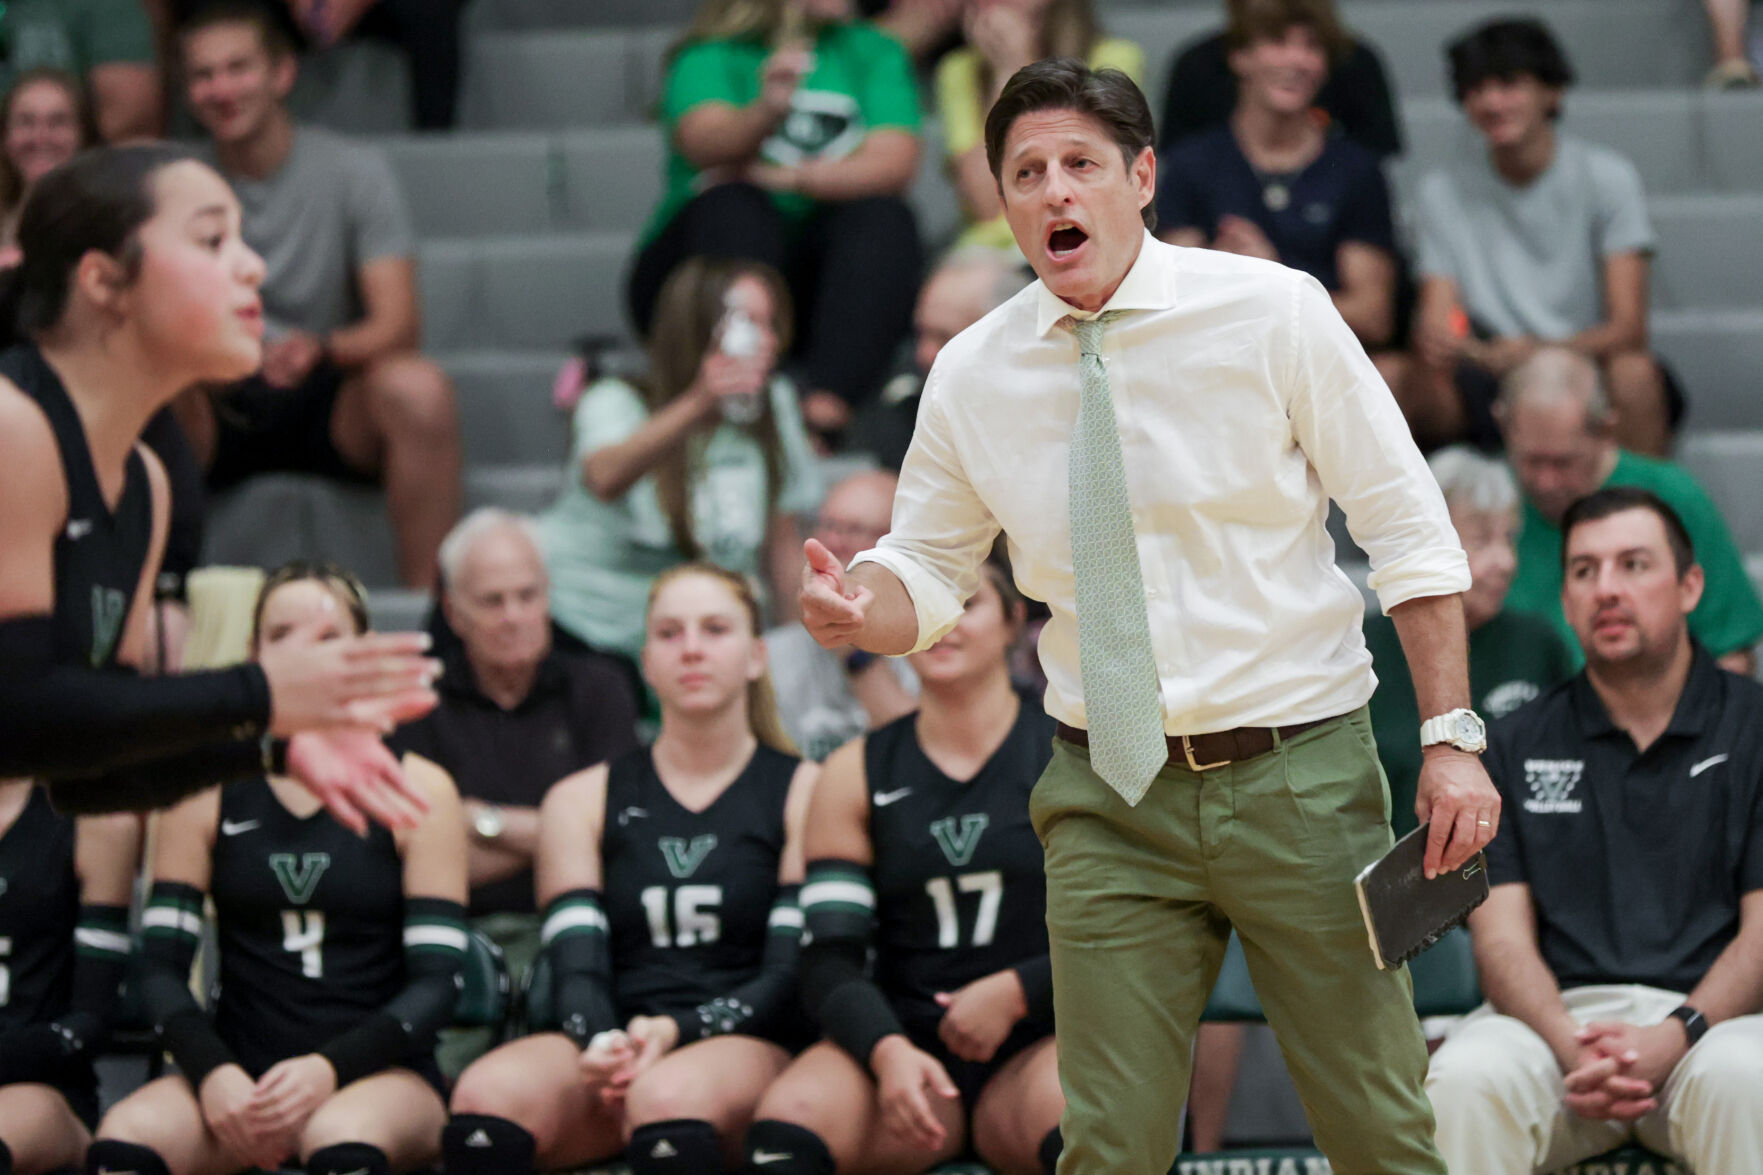 BREAKING NEWS: Wheatley stepping down after 30 seasons as Venice volleyball coach